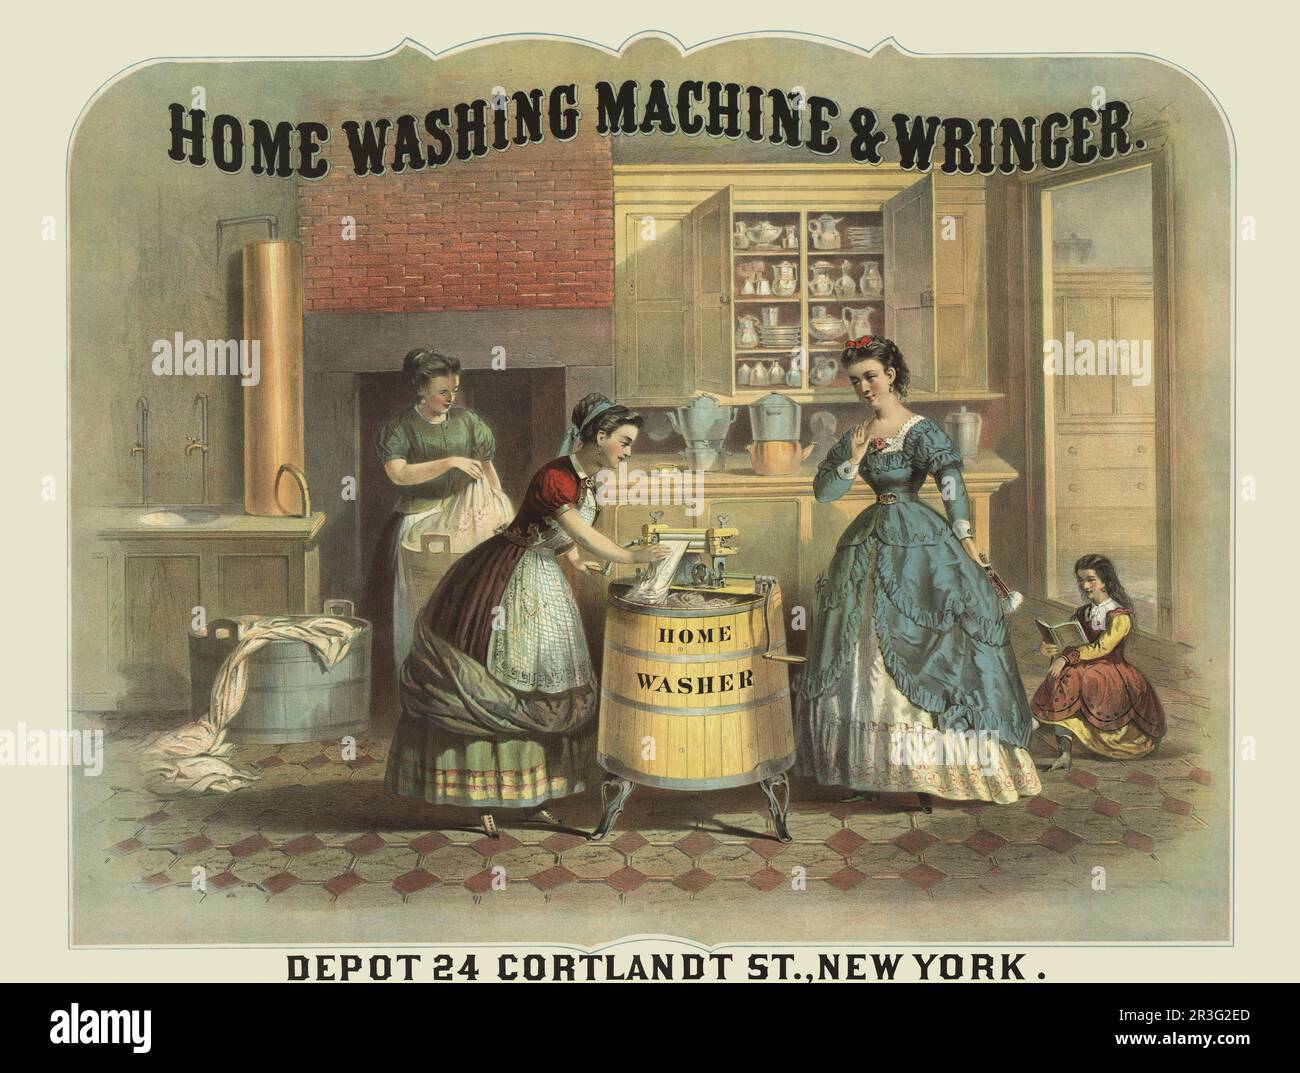 Vintage advertisment for home washing machine and wringer. Stock Photo